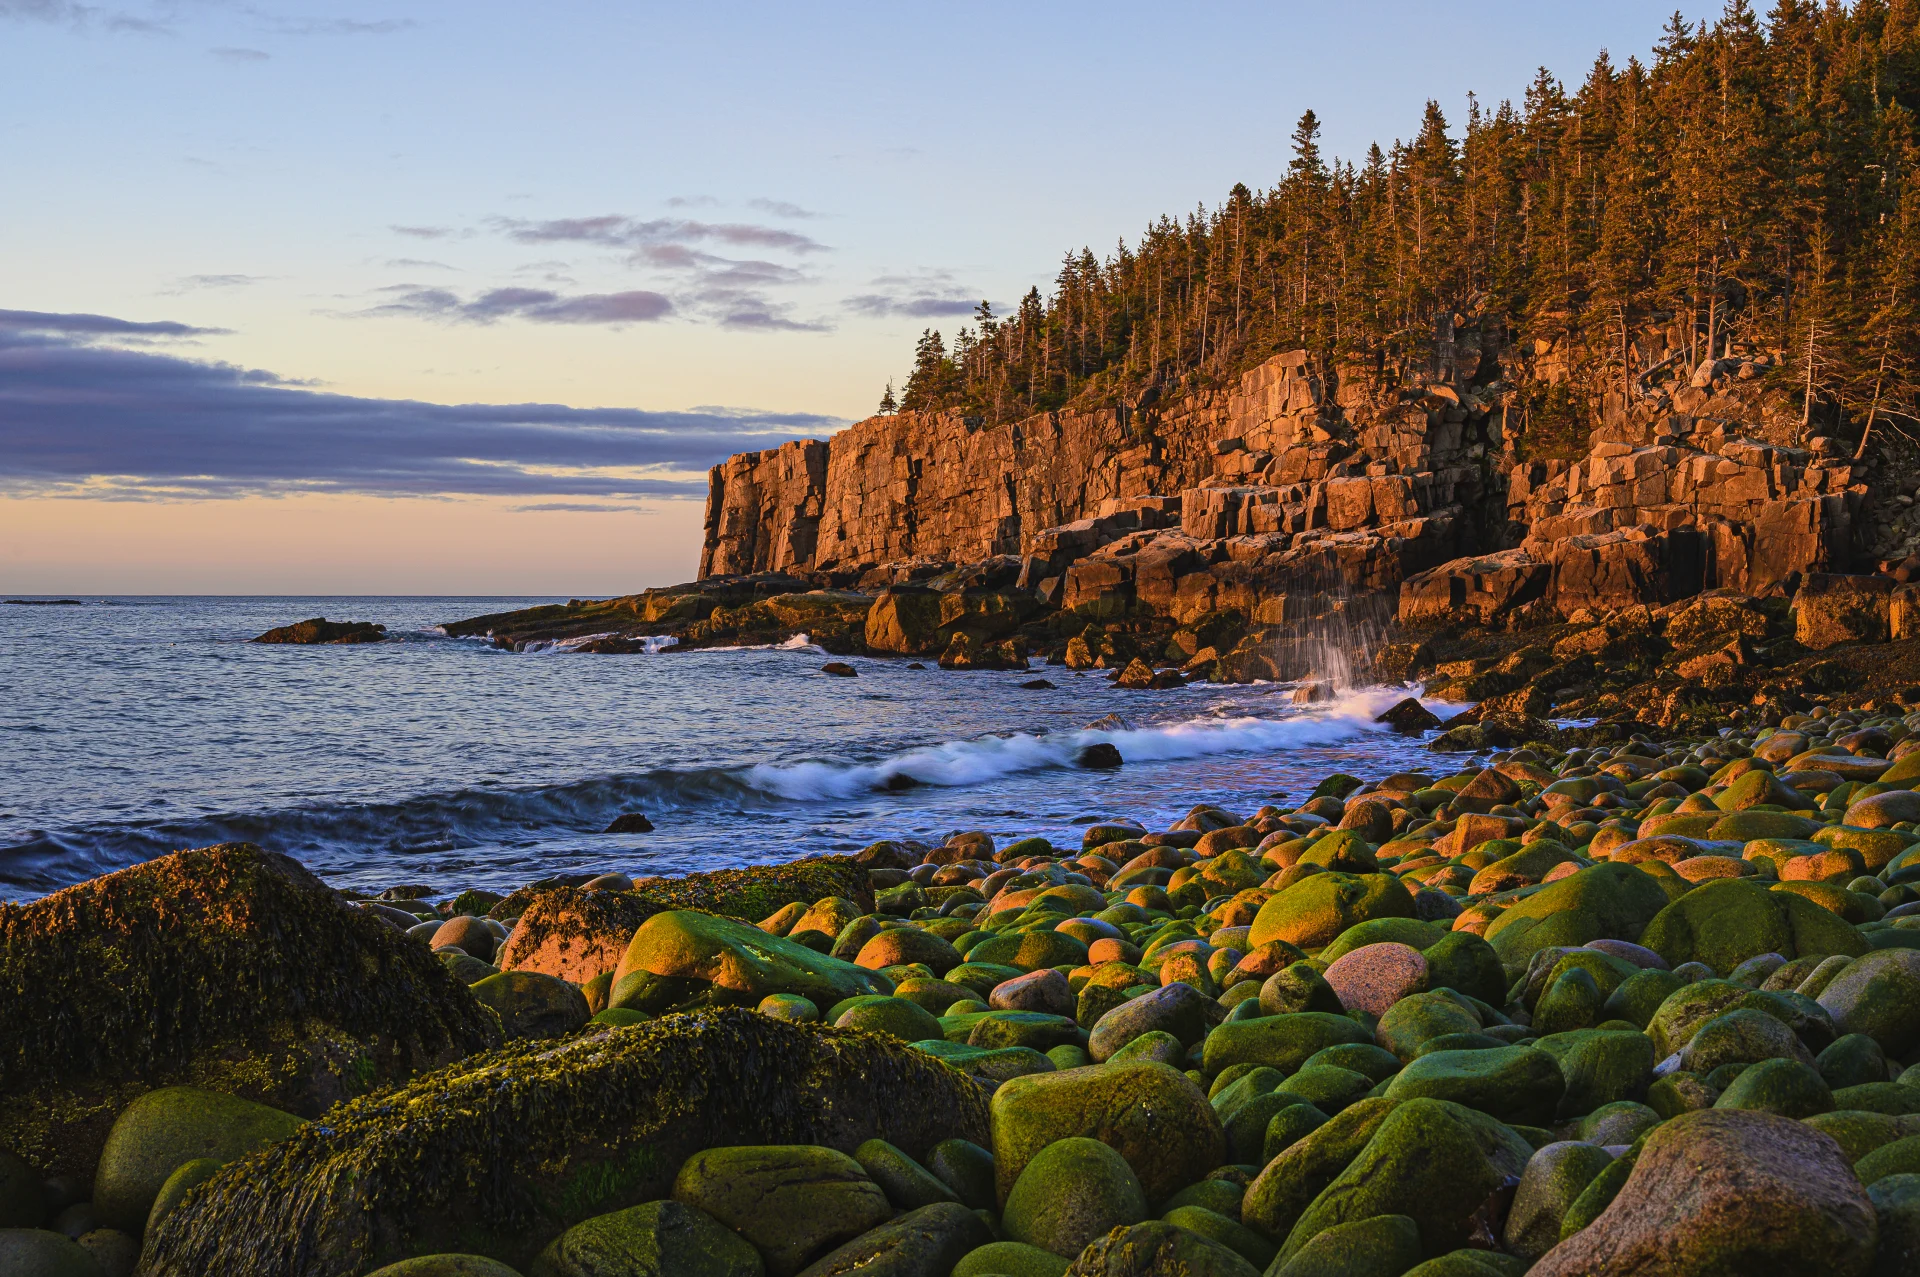 From Halifax to Boston - History, Seafood and Nature Reserves